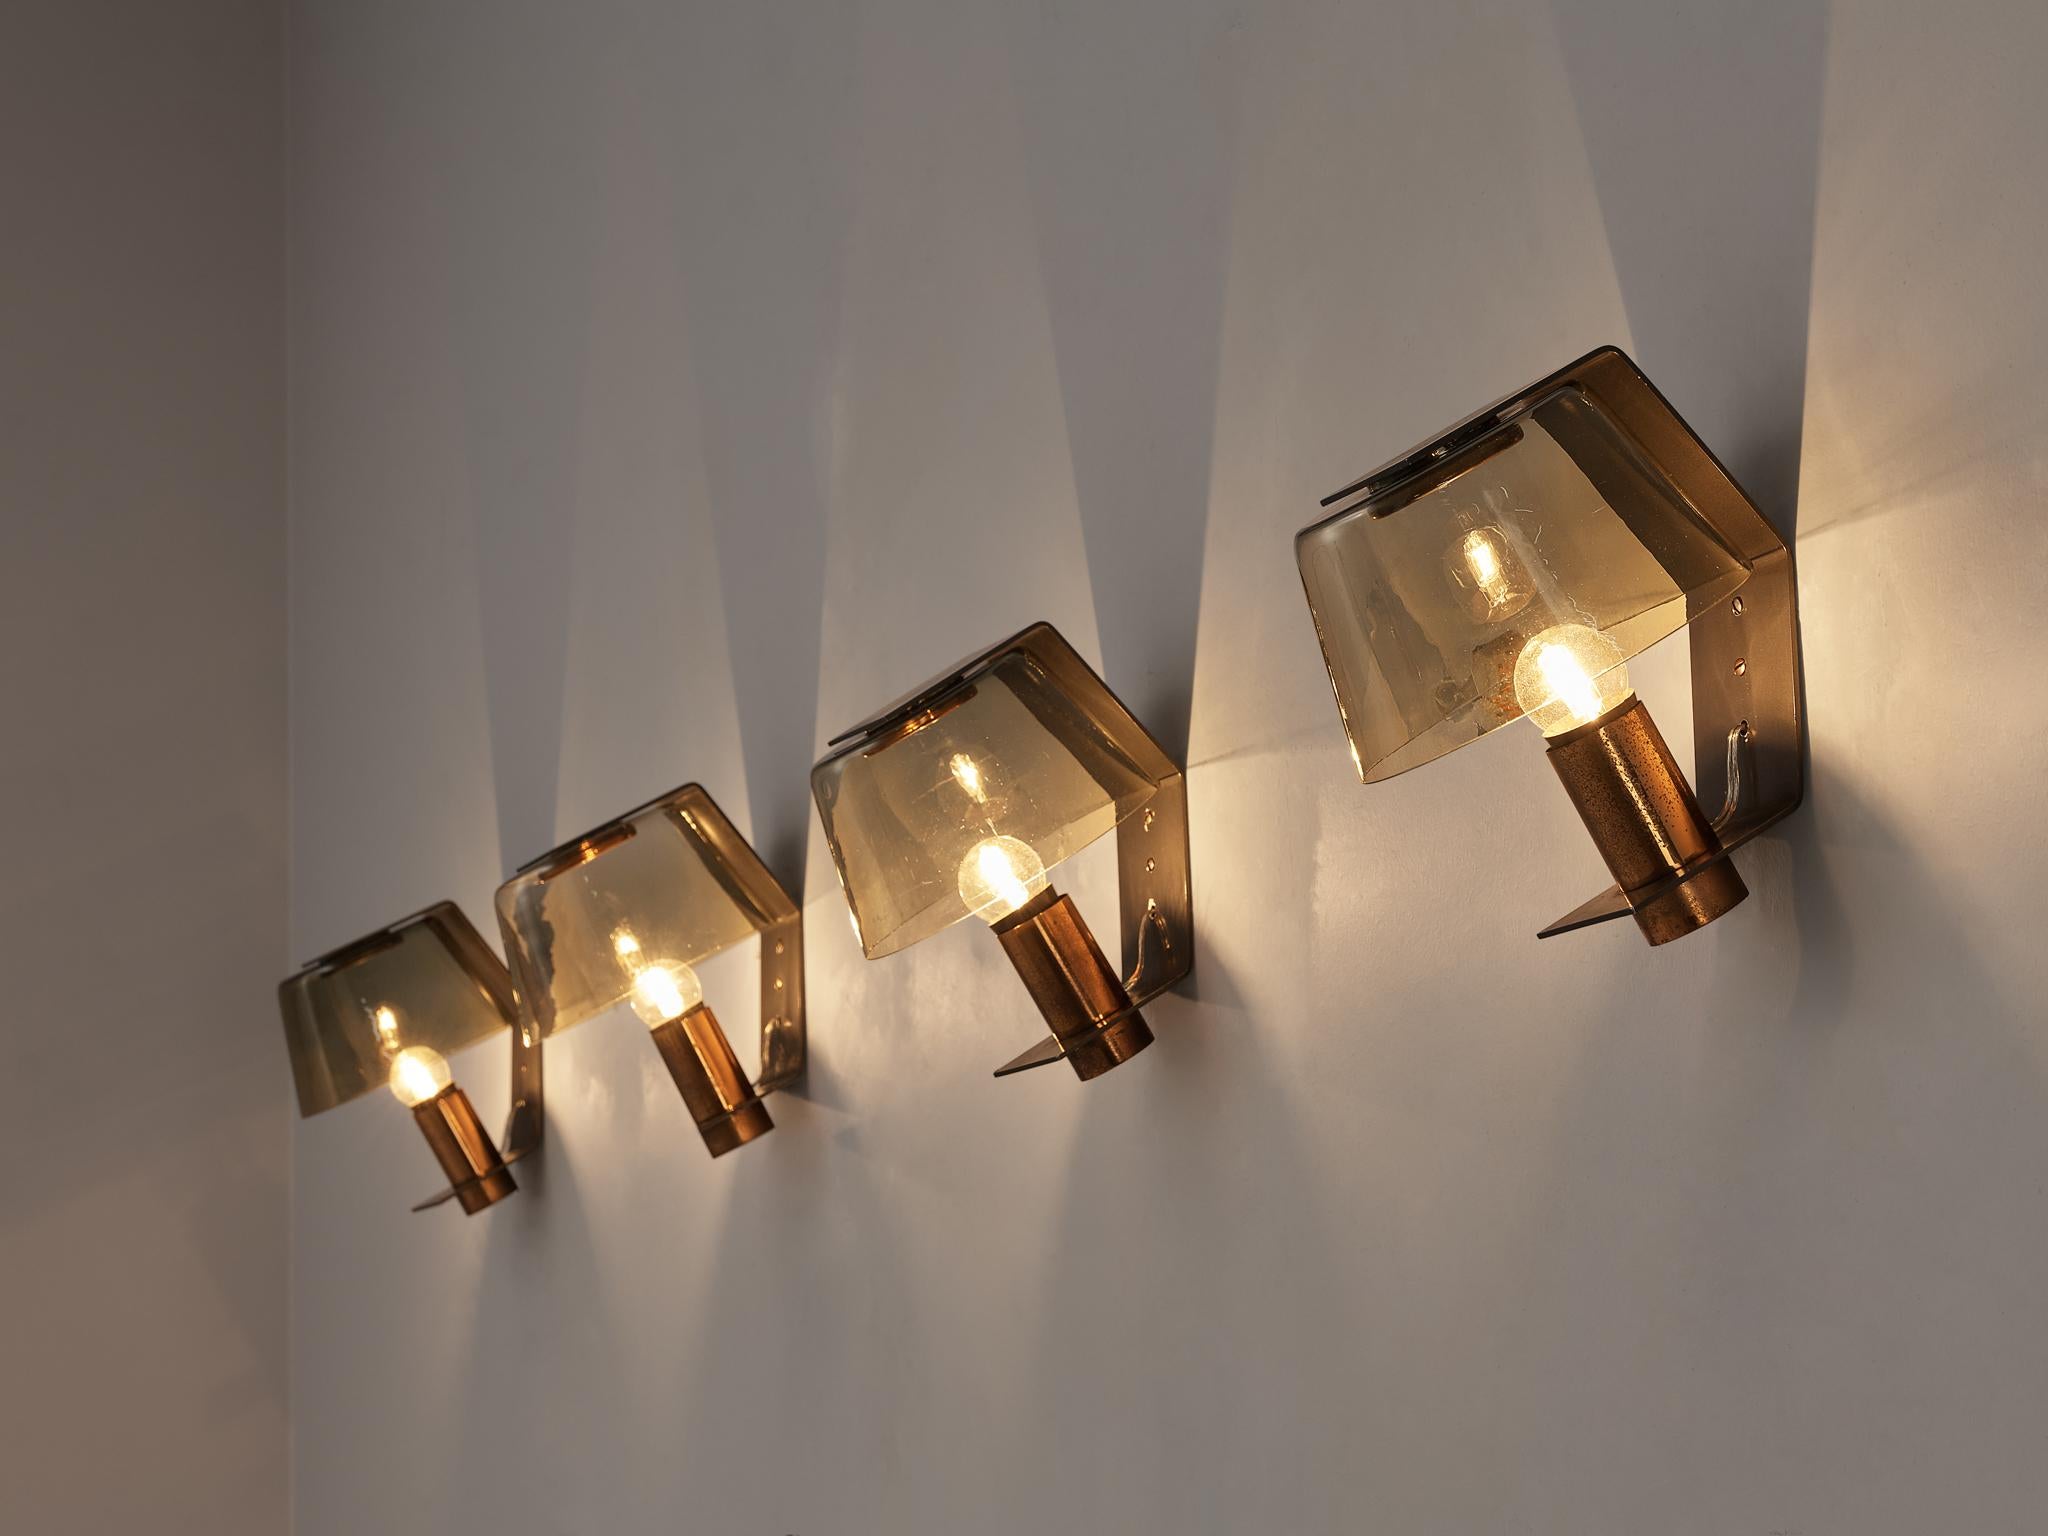 Wall lamps, metal, copper, glass, Scandinavia, 1960s

These wall lamps are designed in a special way. The designer angled the lamp that rests in a metal frame. A base in copper holds the lightbulb that is surrounded by a slightly smoked glass